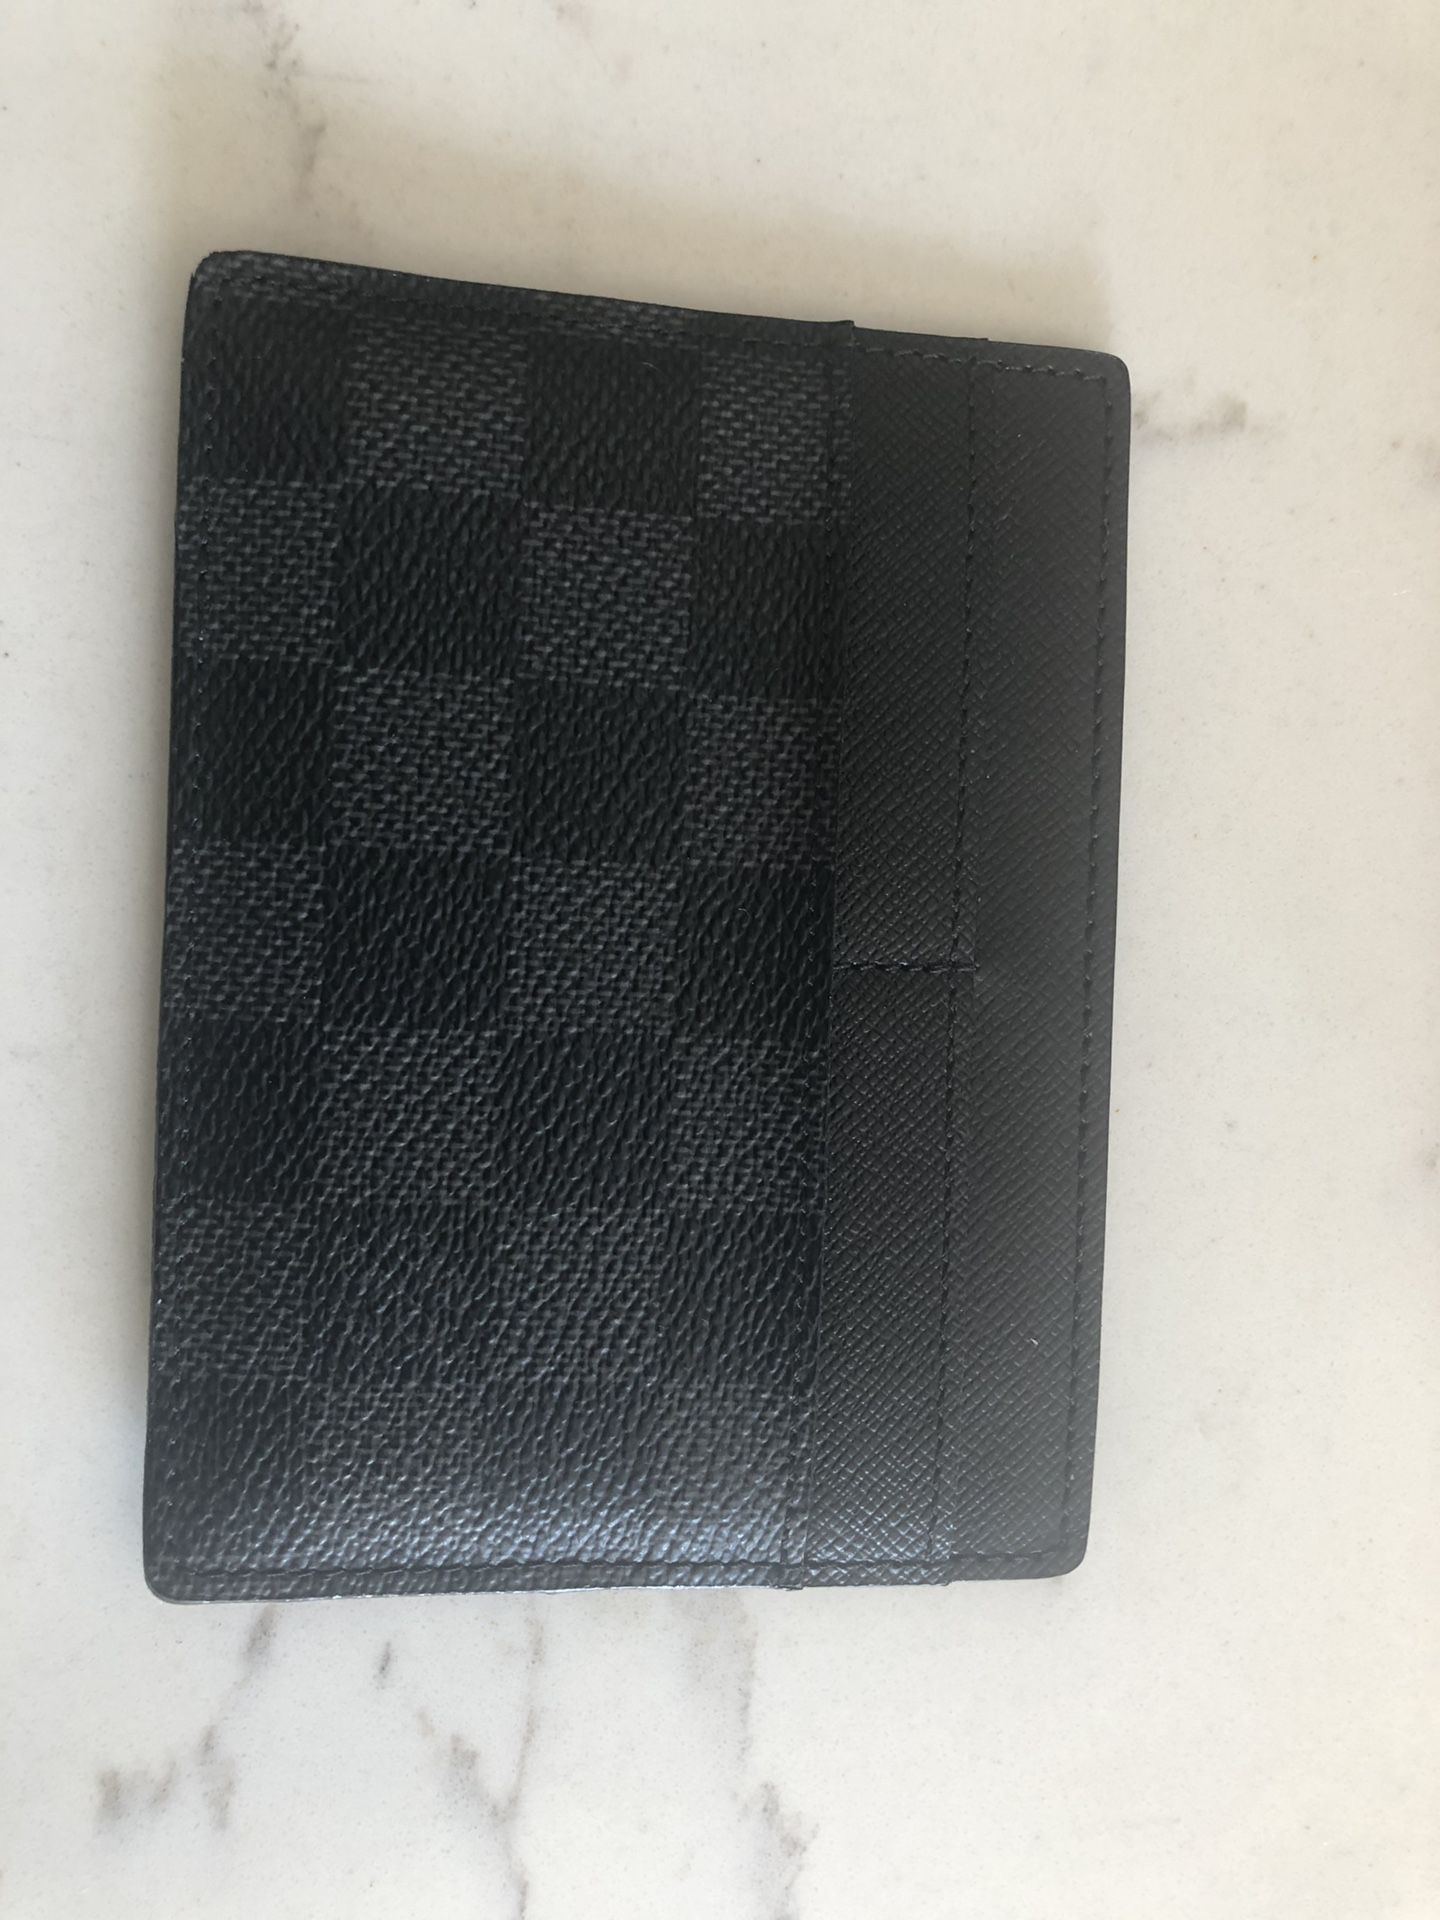 Like New Louis Vuitton Black Damier Card Holder!! 100% Authentic with Receipt (see photos)!!